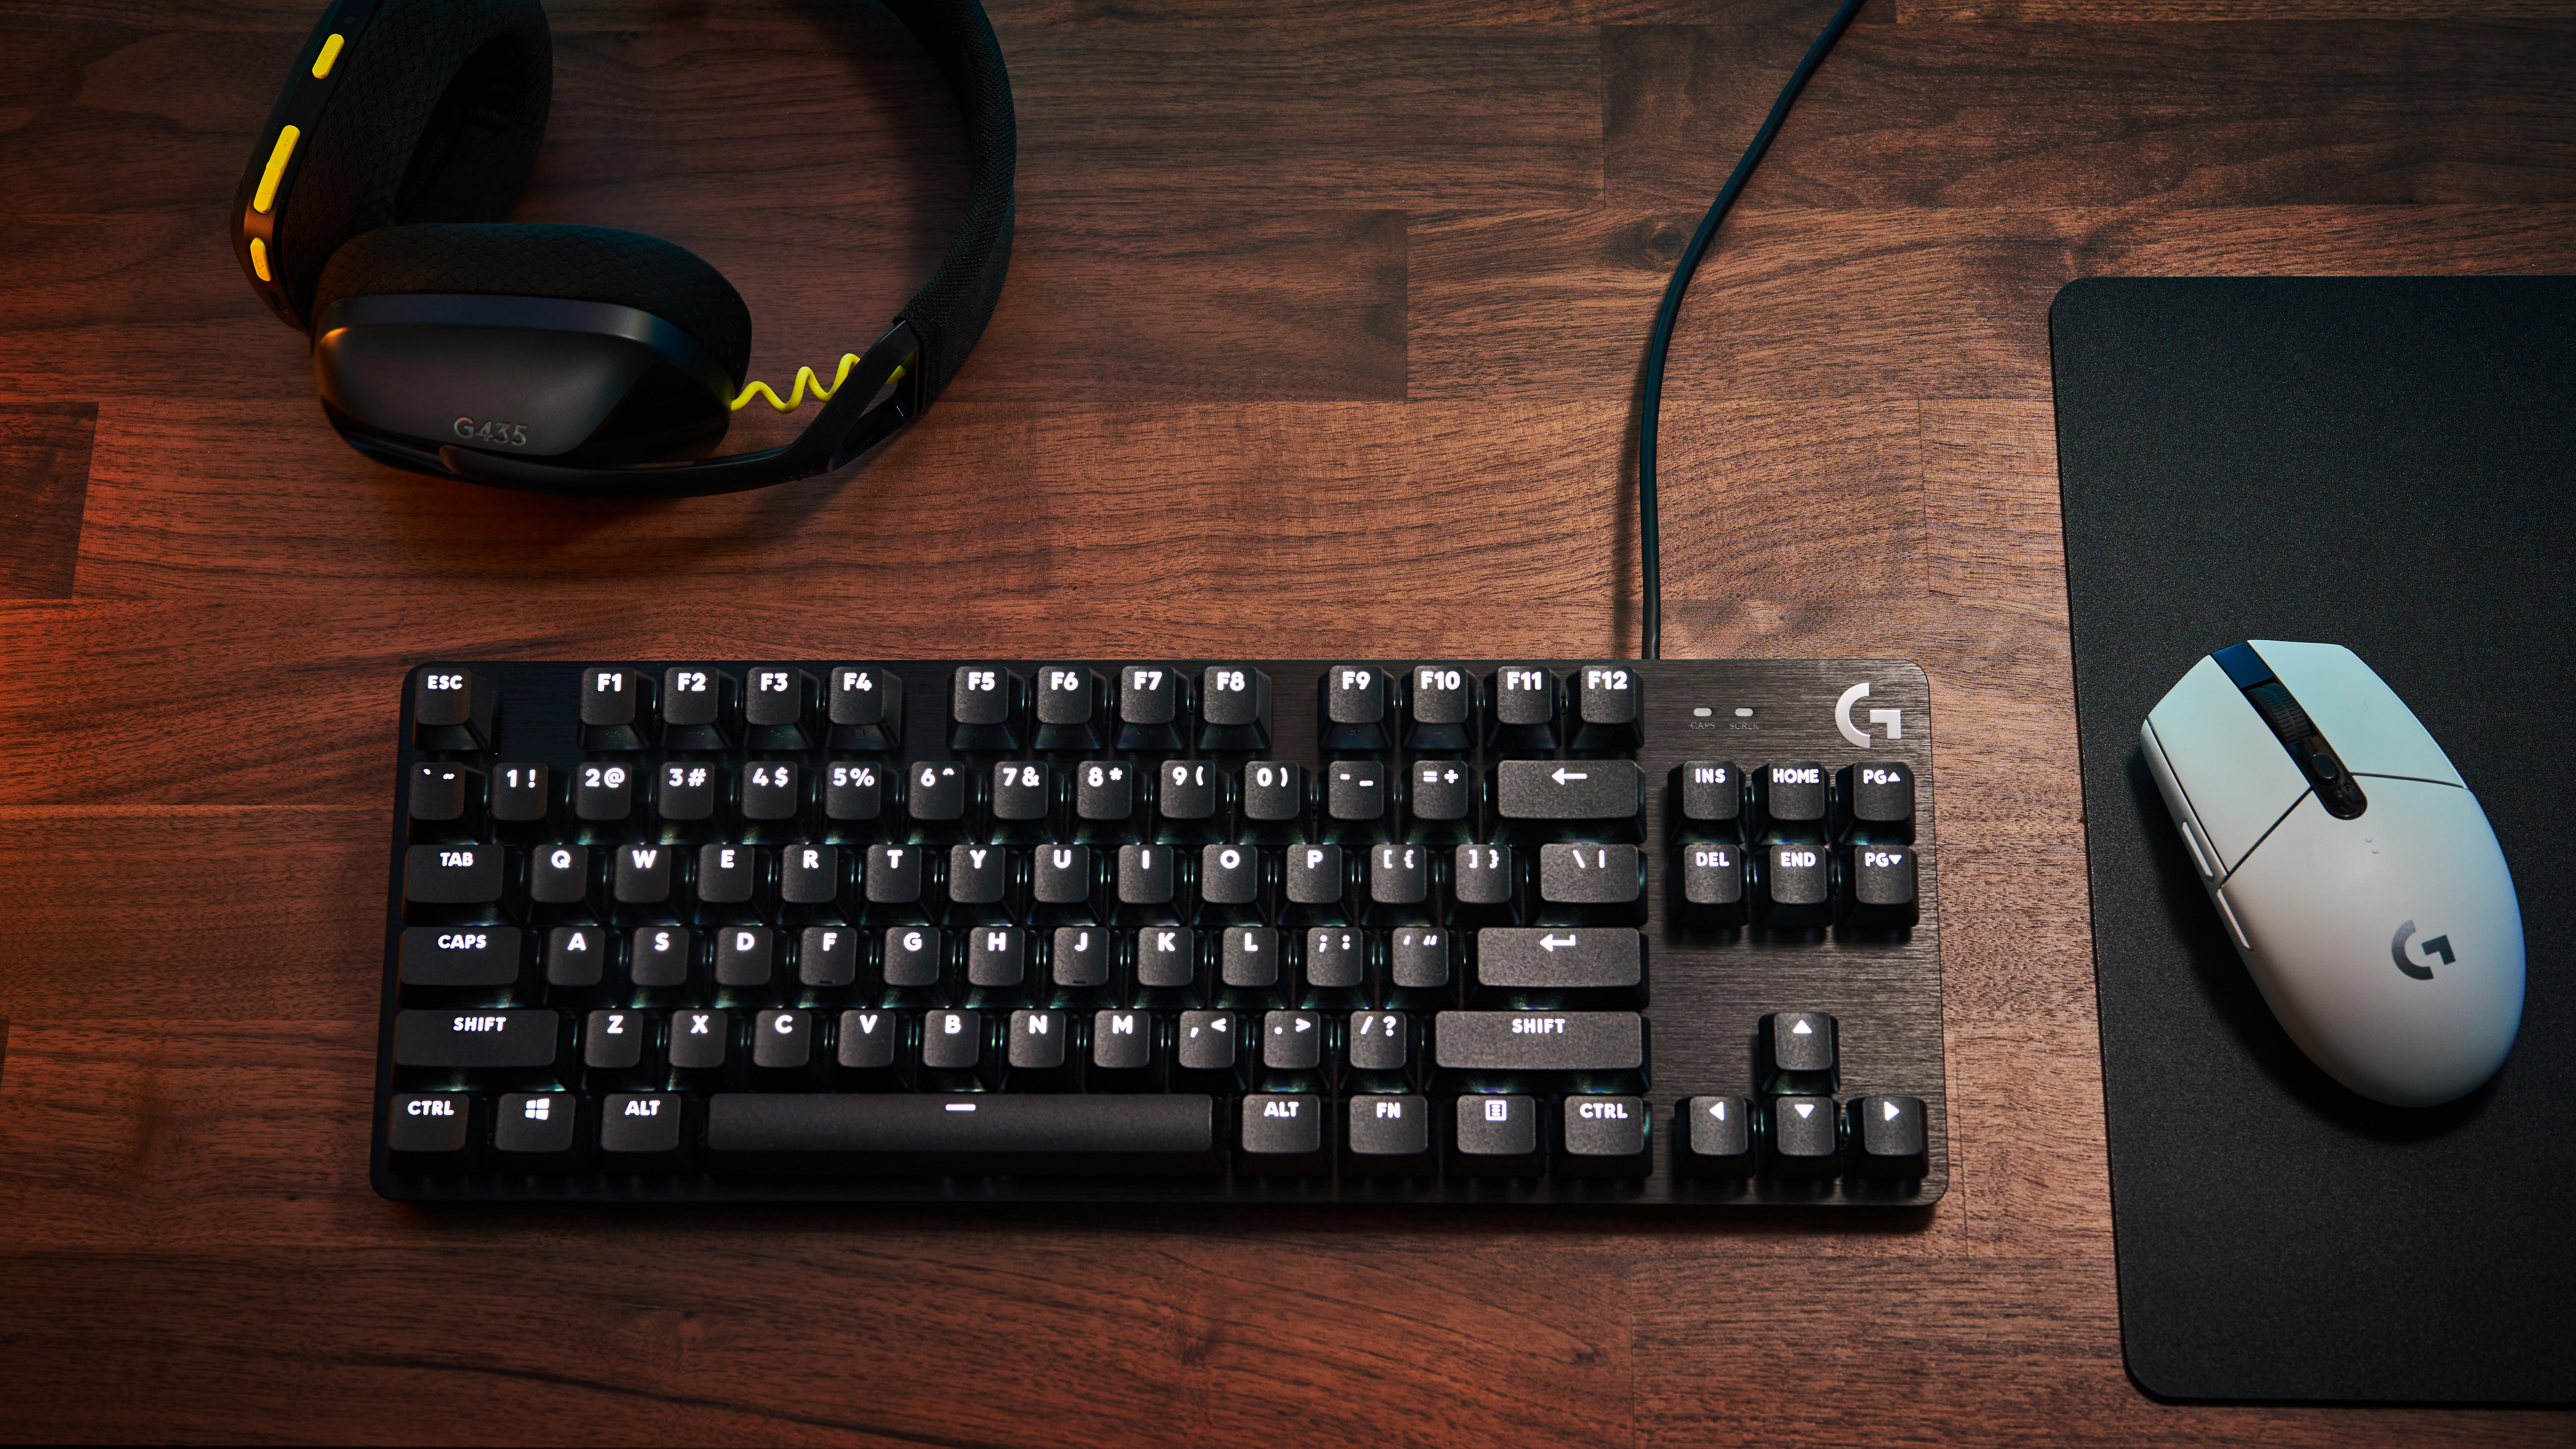 SteelSeries Apex Pro Review: A Taste of Gaming Keyboards' Future